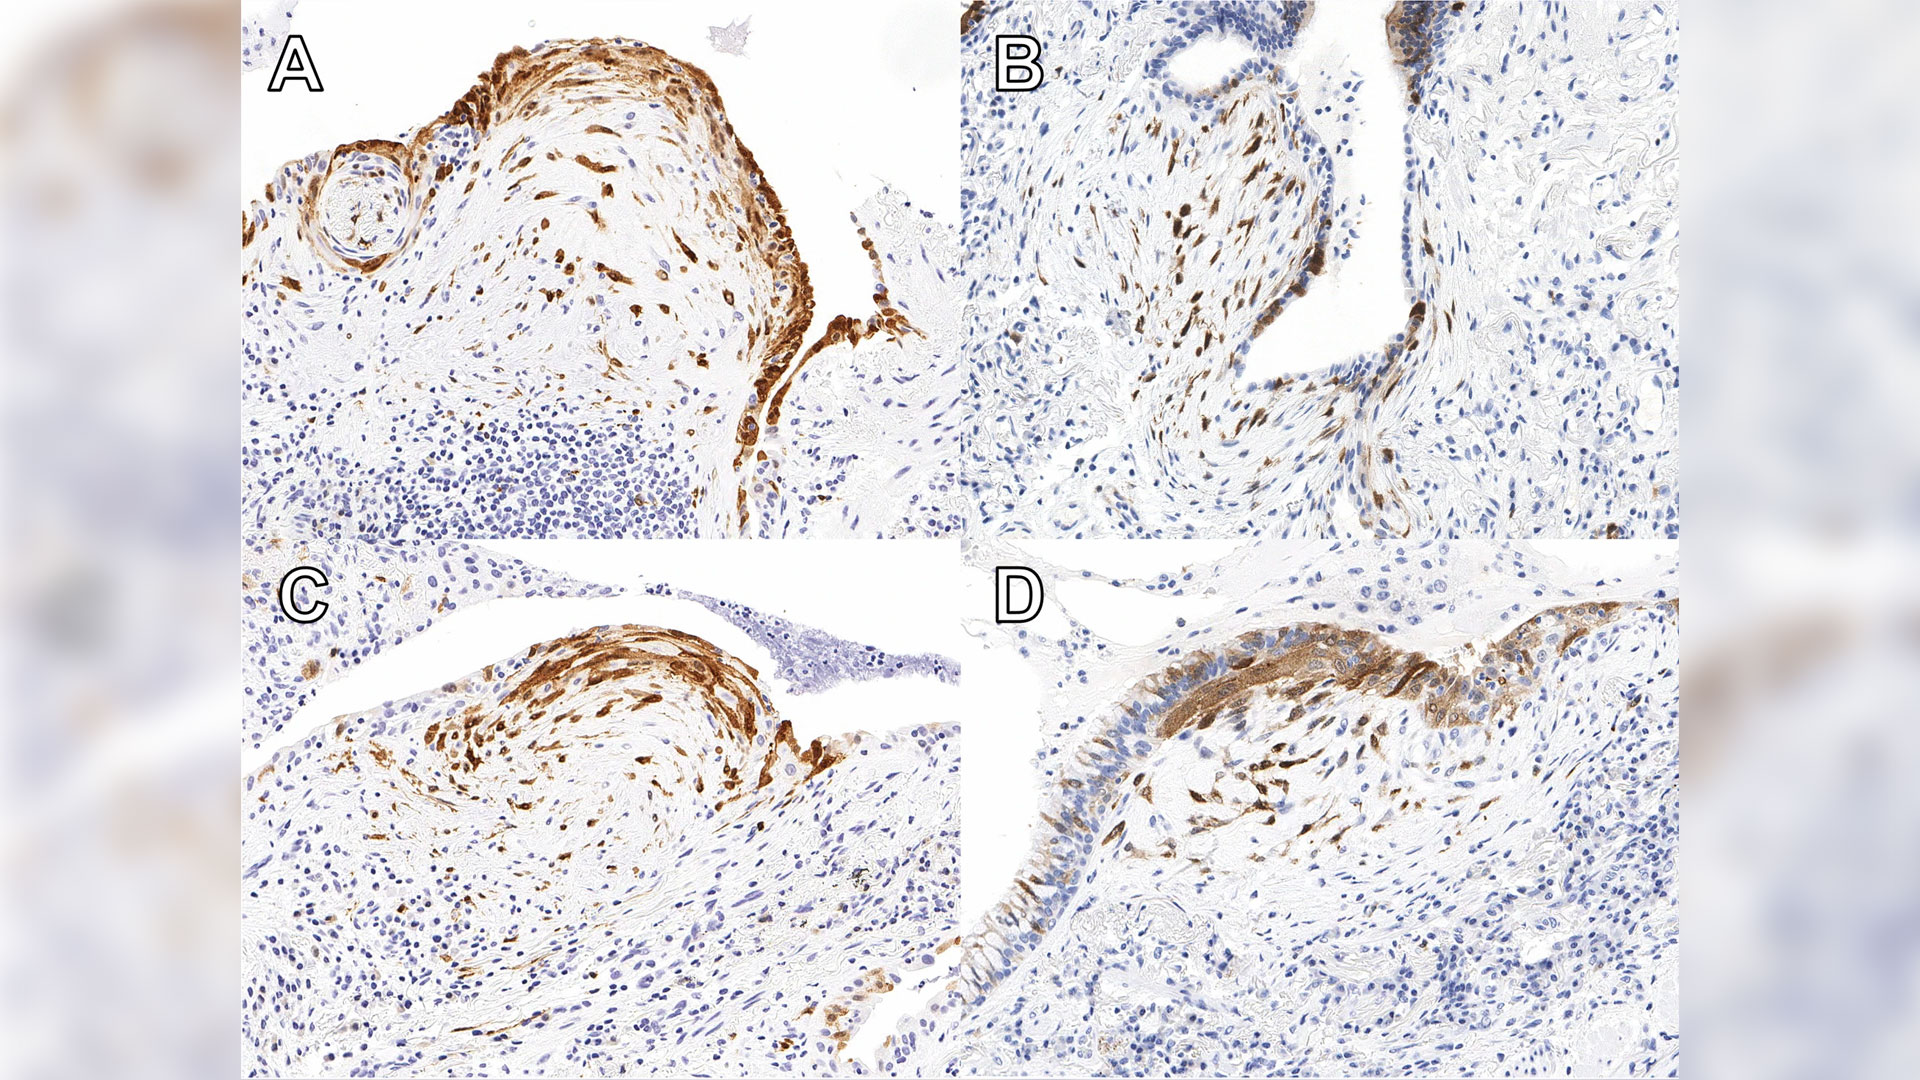 p16-positive foci were defined as concurrent expression of p16 (brown) in loose collections of fibroblasts the overlying flat (A), simple cuboidal (B and C) or columnar epithelium (D). Cases classified as p16-low had ≤ 2.1 foci per 100 mm2 lung tissue, and cases classified as p16-high had > 2.1 foci per 100 mm2 lung tissue